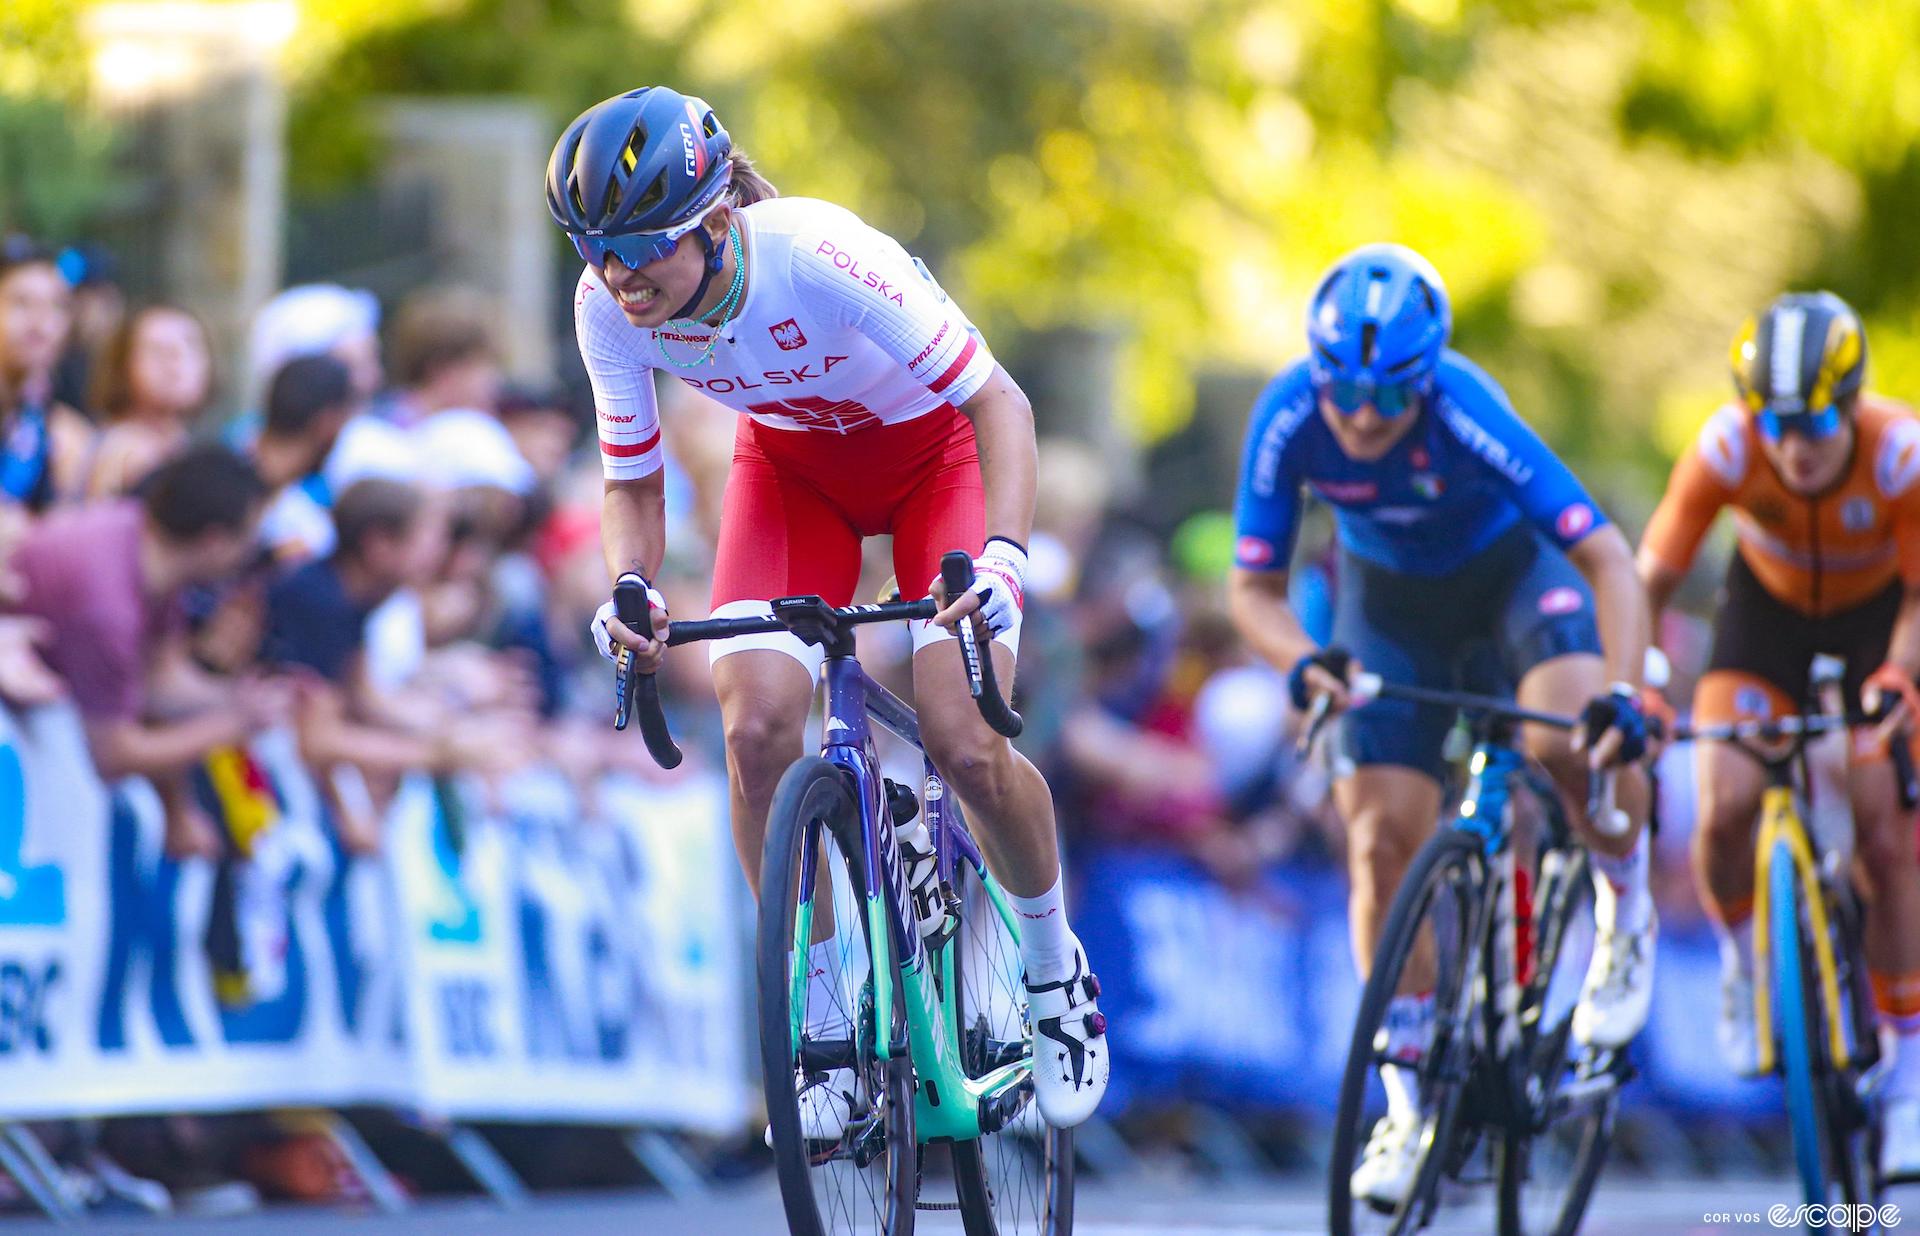 Kasia Niewiadoma on the attack at the 2021 World Road Championships, wearing the white and red Polish national team kit.